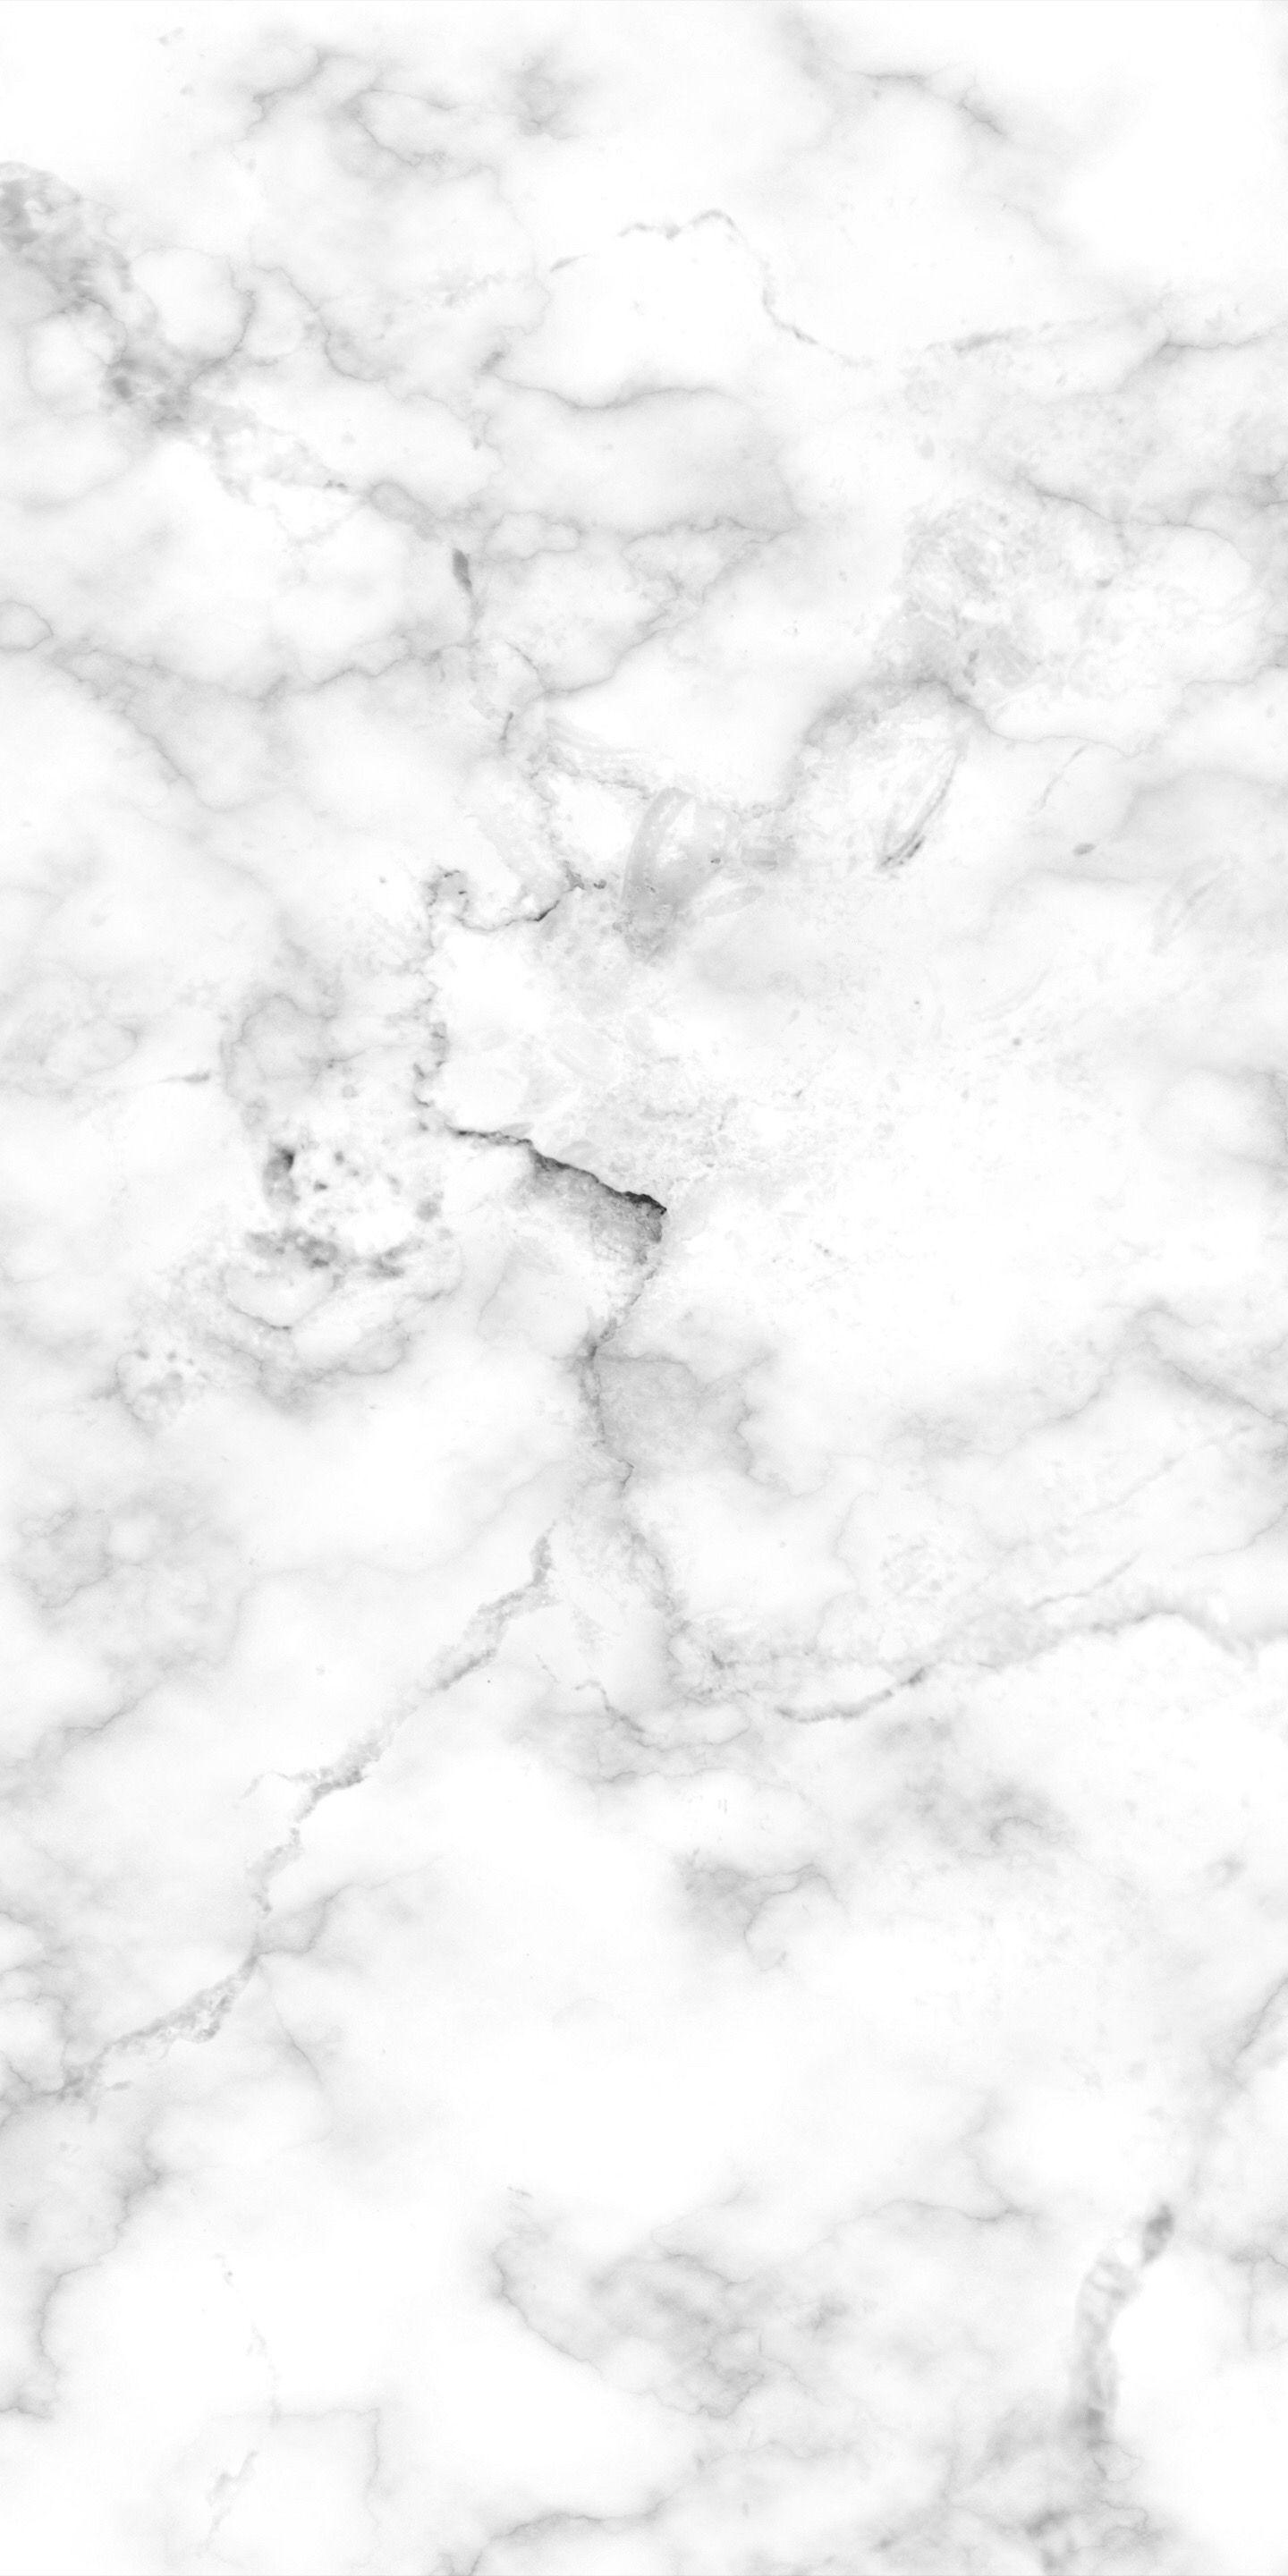 A black and white marble texture - Marble